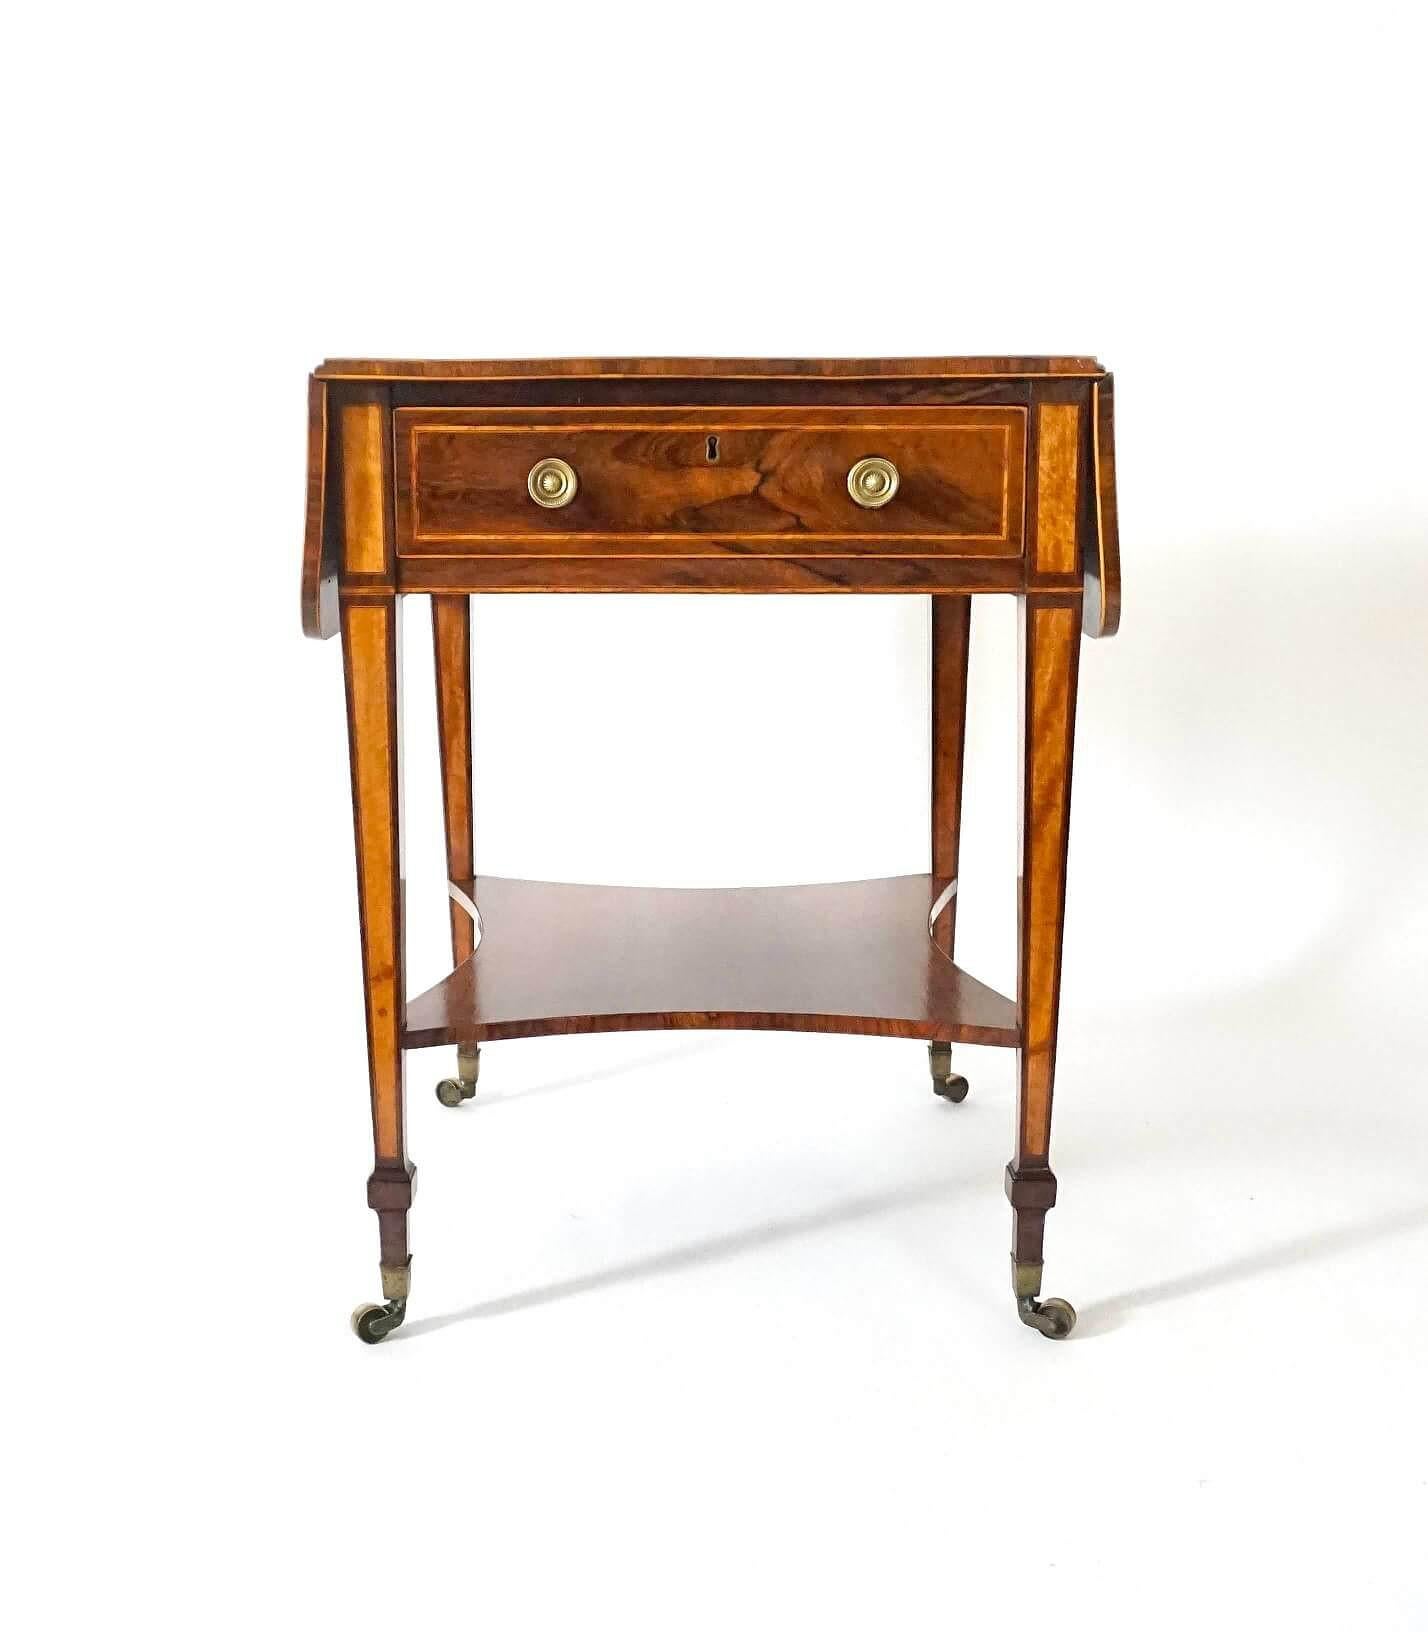 An extremely fine circa 1800 English George III period rosewood and satinwood 'Sheraton' pembroke table of rectangular double sided form, the top having drop 'D' shaped ends above full length drawer and false reverse-side all with finely cast brass